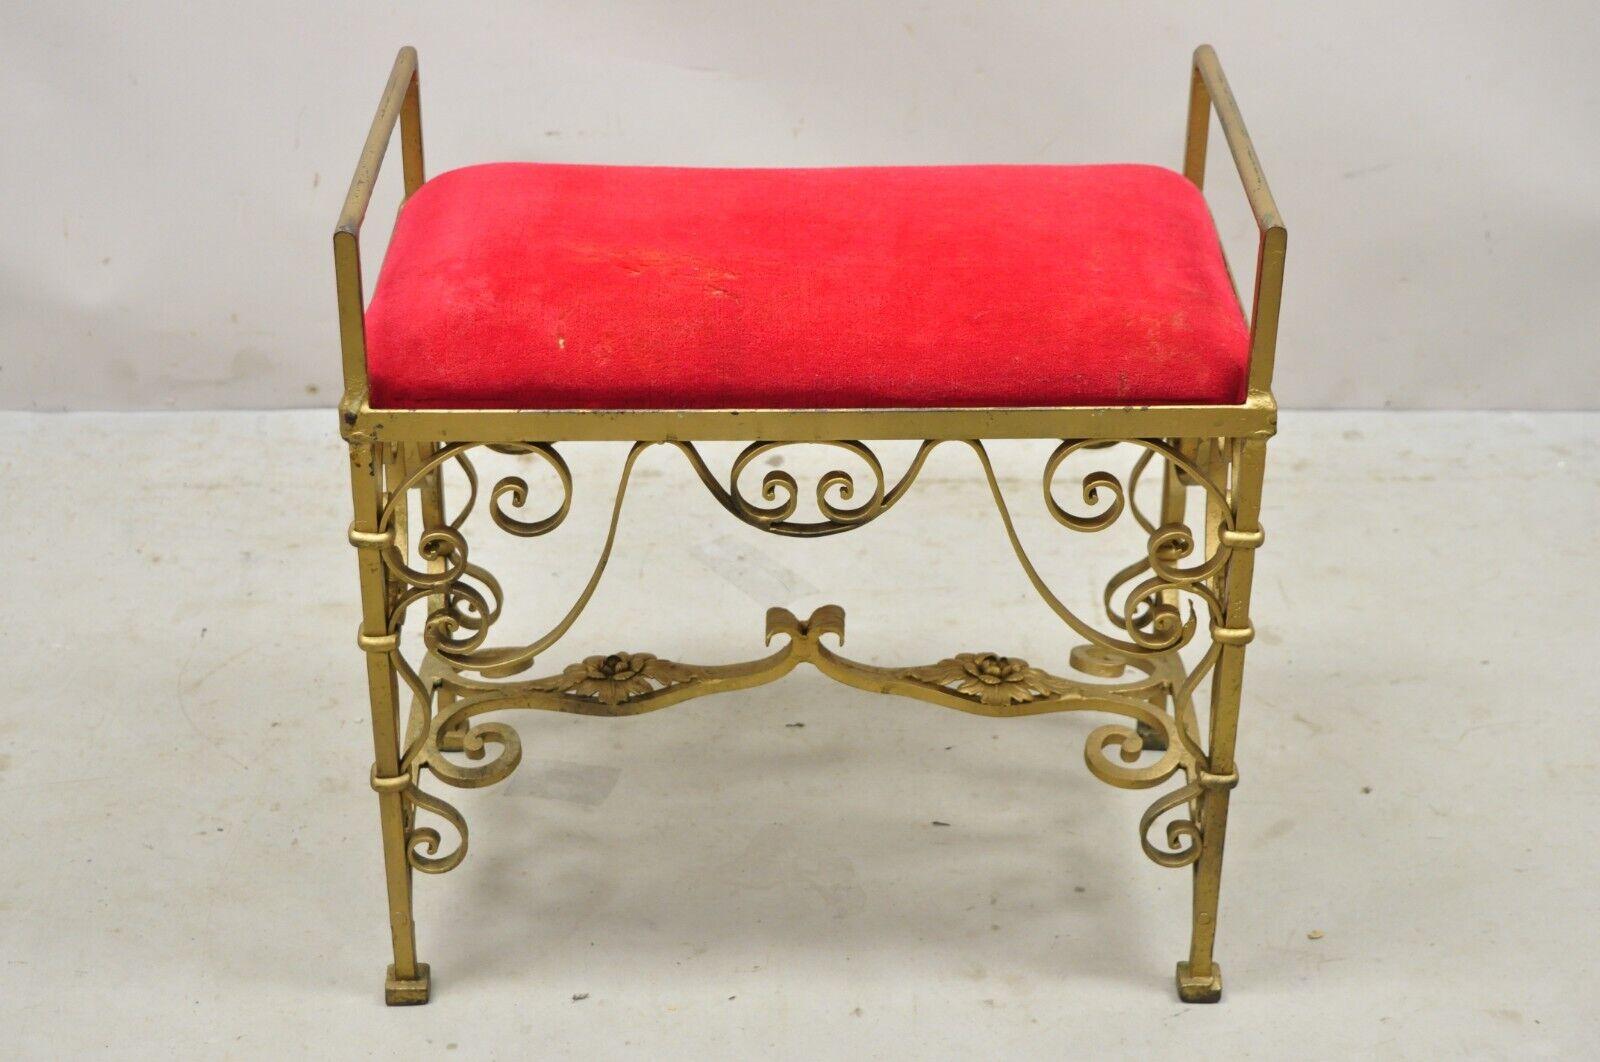 Vintage Gold Hollywood Regency Gothic Scrolling Iron Vanity Bench Seat Stool. Item features a heavy iron frame, distressed gold finish, ornate scrollwork, red upholstered seat, very nice vintage item, quality craftsmanship, great style and form.